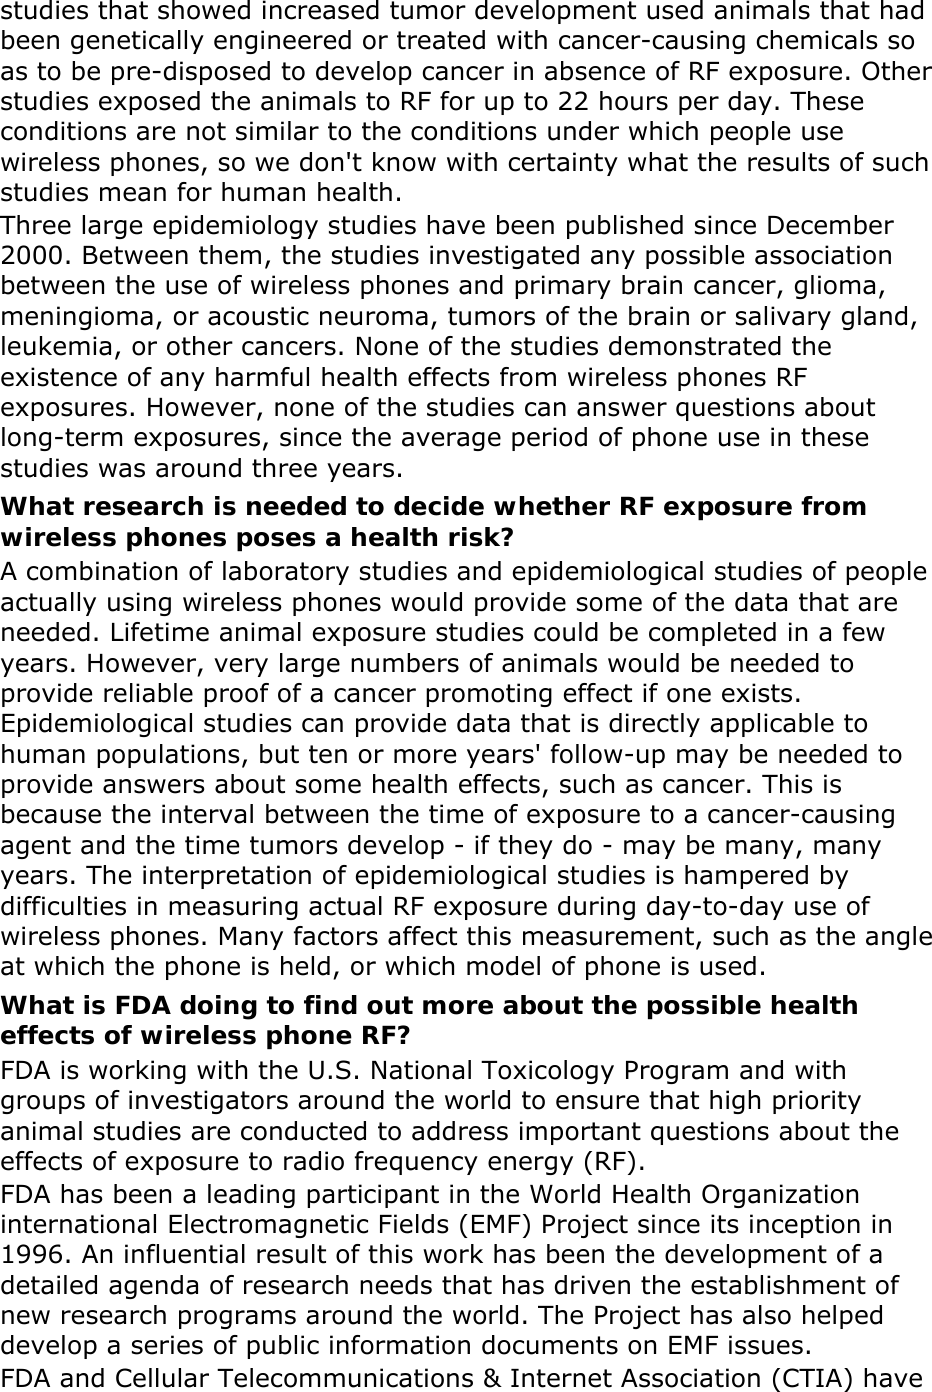 studies that showed increased tumor development used animals that had been genetically engineered or treated with cancer-causing chemicals so as to be pre-disposed to develop cancer in absence of RF exposure. Other studies exposed the animals to RF for up to 22 hours per day. These conditions are not similar to the conditions under which people use wireless phones, so we don&apos;t know with certainty what the results of such studies mean for human health. Three large epidemiology studies have been published since December 2000. Between them, the studies investigated any possible association between the use of wireless phones and primary brain cancer, glioma, meningioma, or acoustic neuroma, tumors of the brain or salivary gland, leukemia, or other cancers. None of the studies demonstrated the existence of any harmful health effects from wireless phones RF exposures. However, none of the studies can answer questions about long-term exposures, since the average period of phone use in these studies was around three years. What research is needed to decide whether RF exposure from wireless phones poses a health risk? A combination of laboratory studies and epidemiological studies of people actually using wireless phones would provide some of the data that are needed. Lifetime animal exposure studies could be completed in a few years. However, very large numbers of animals would be needed to provide reliable proof of a cancer promoting effect if one exists. Epidemiological studies can provide data that is directly applicable to human populations, but ten or more years&apos; follow-up may be needed to provide answers about some health effects, such as cancer. This is because the interval between the time of exposure to a cancer-causing agent and the time tumors develop - if they do - may be many, many years. The interpretation of epidemiological studies is hampered by difficulties in measuring actual RF exposure during day-to-day use of wireless phones. Many factors affect this measurement, such as the angle at which the phone is held, or which model of phone is used. What is FDA doing to find out more about the possible health effects of wireless phone RF? FDA is working with the U.S. National Toxicology Program and with groups of investigators around the world to ensure that high priority animal studies are conducted to address important questions about the effects of exposure to radio frequency energy (RF). FDA has been a leading participant in the World Health Organization international Electromagnetic Fields (EMF) Project since its inception in 1996. An influential result of this work has been the development of a detailed agenda of research needs that has driven the establishment of new research programs around the world. The Project has also helped develop a series of public information documents on EMF issues. FDA and Cellular Telecommunications &amp; Internet Association (CTIA) have 